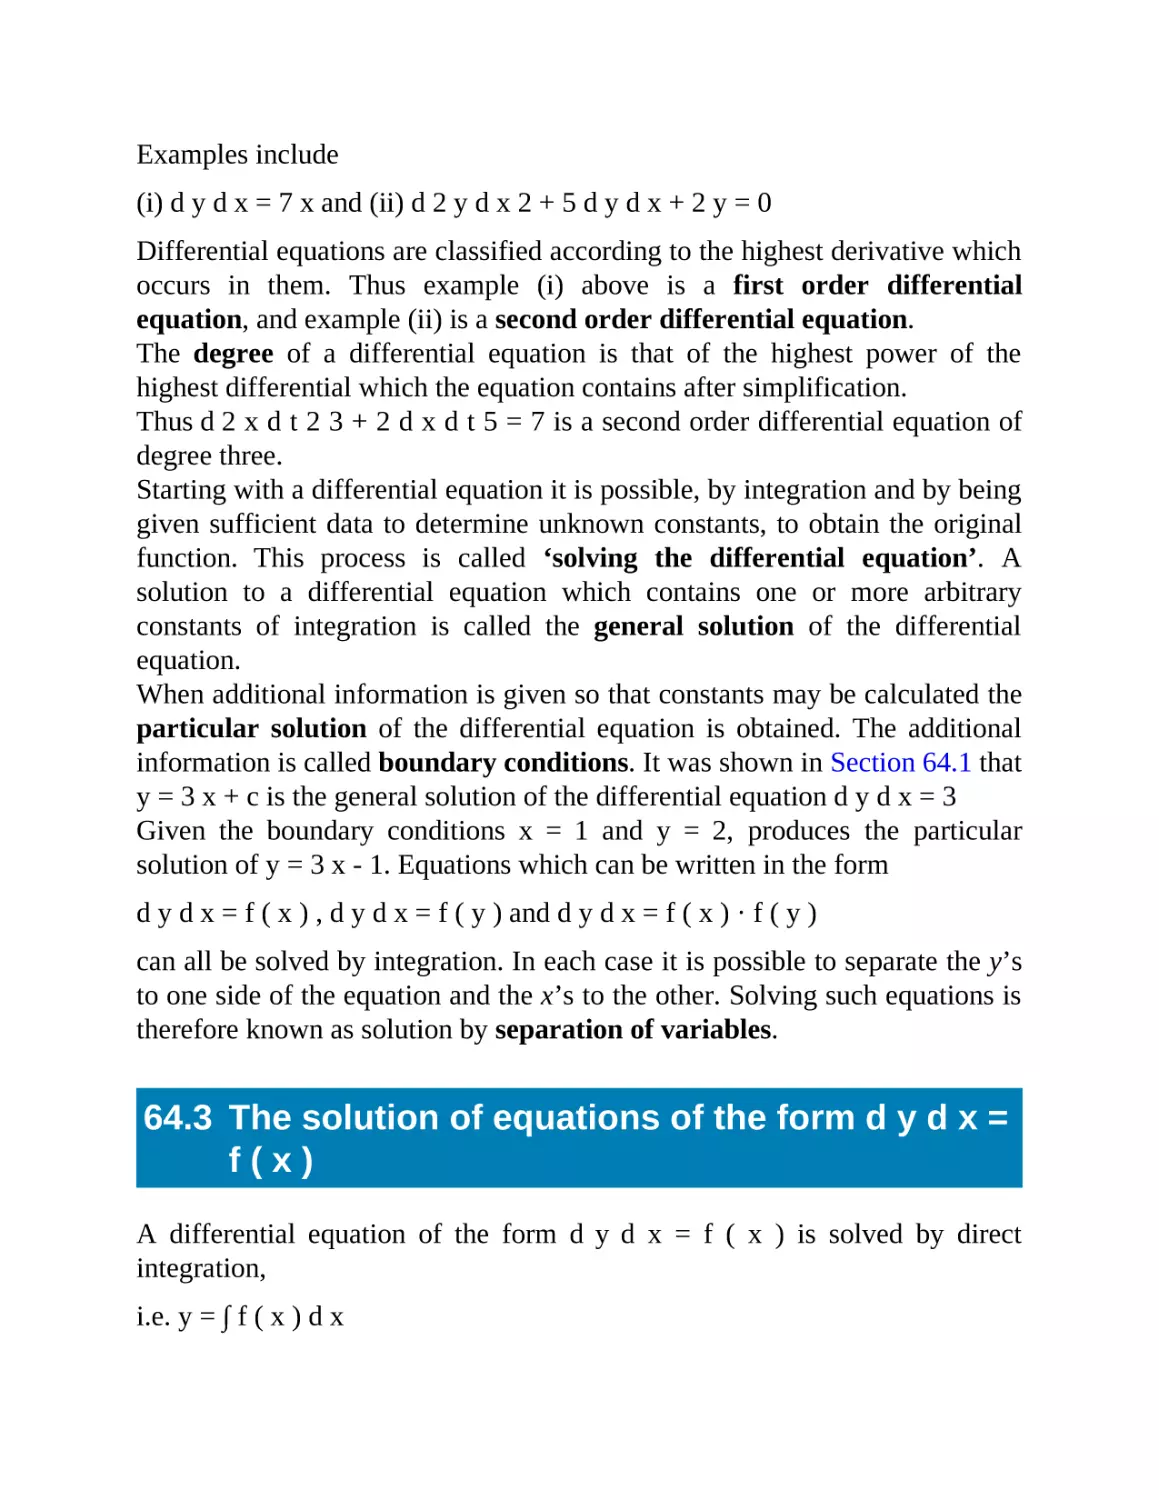 64.3 The solution of equations of the form